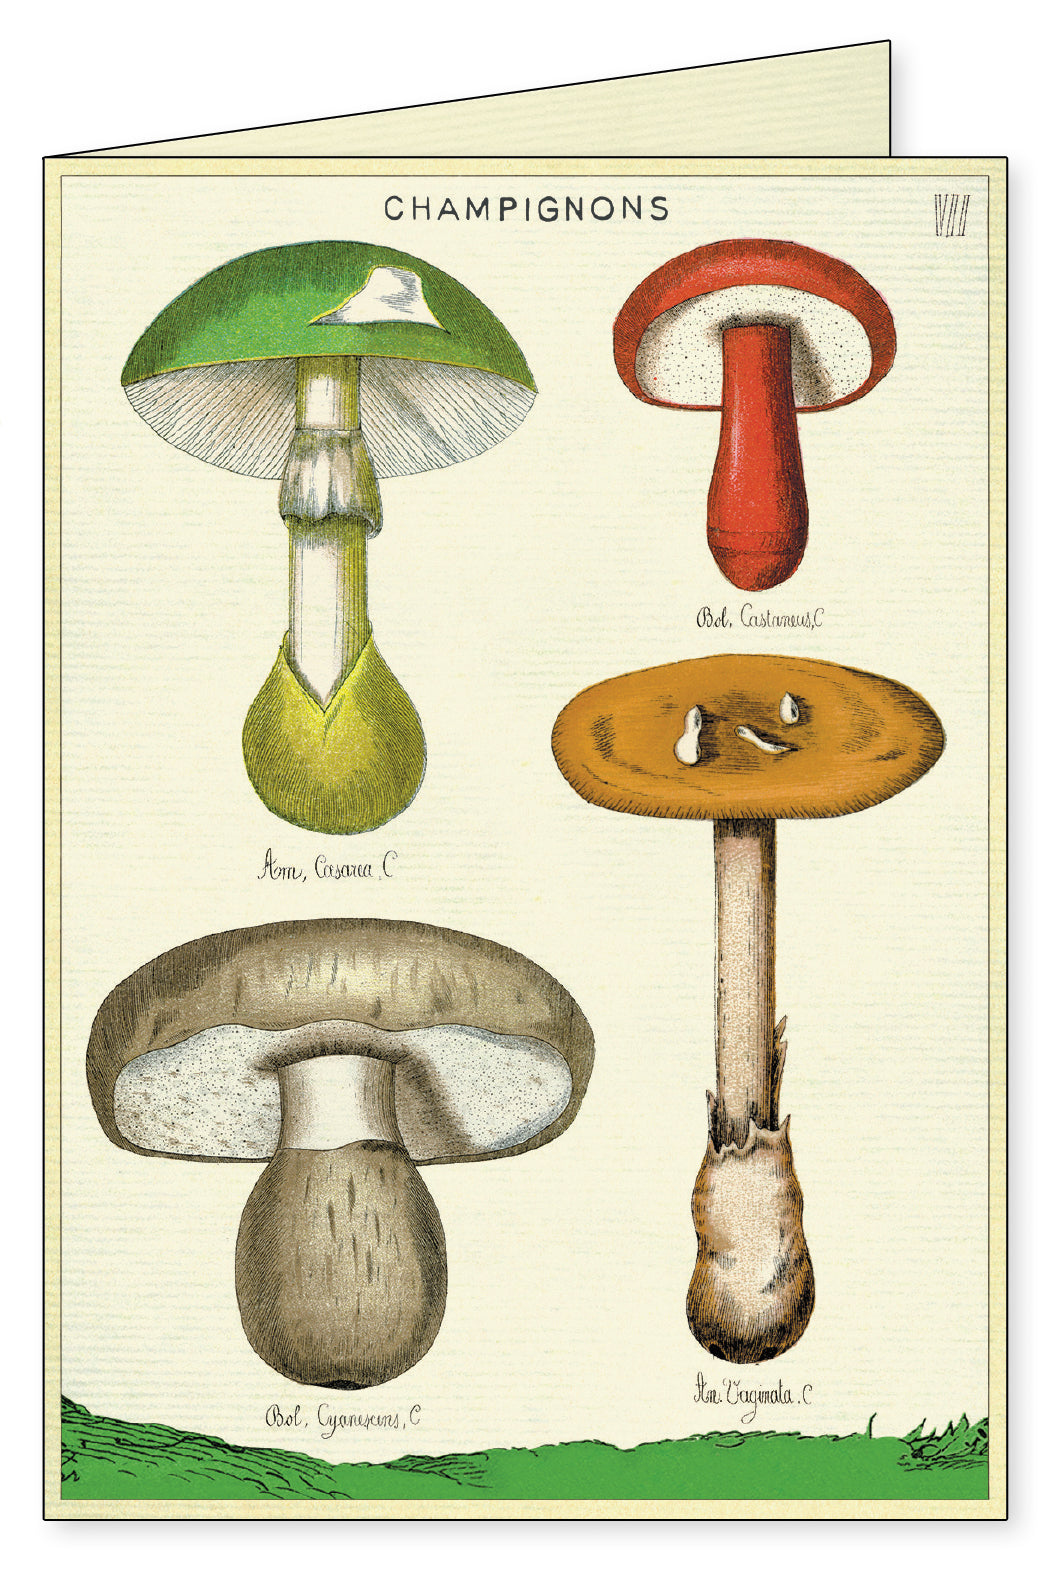 Foraging Notecards Set of 8